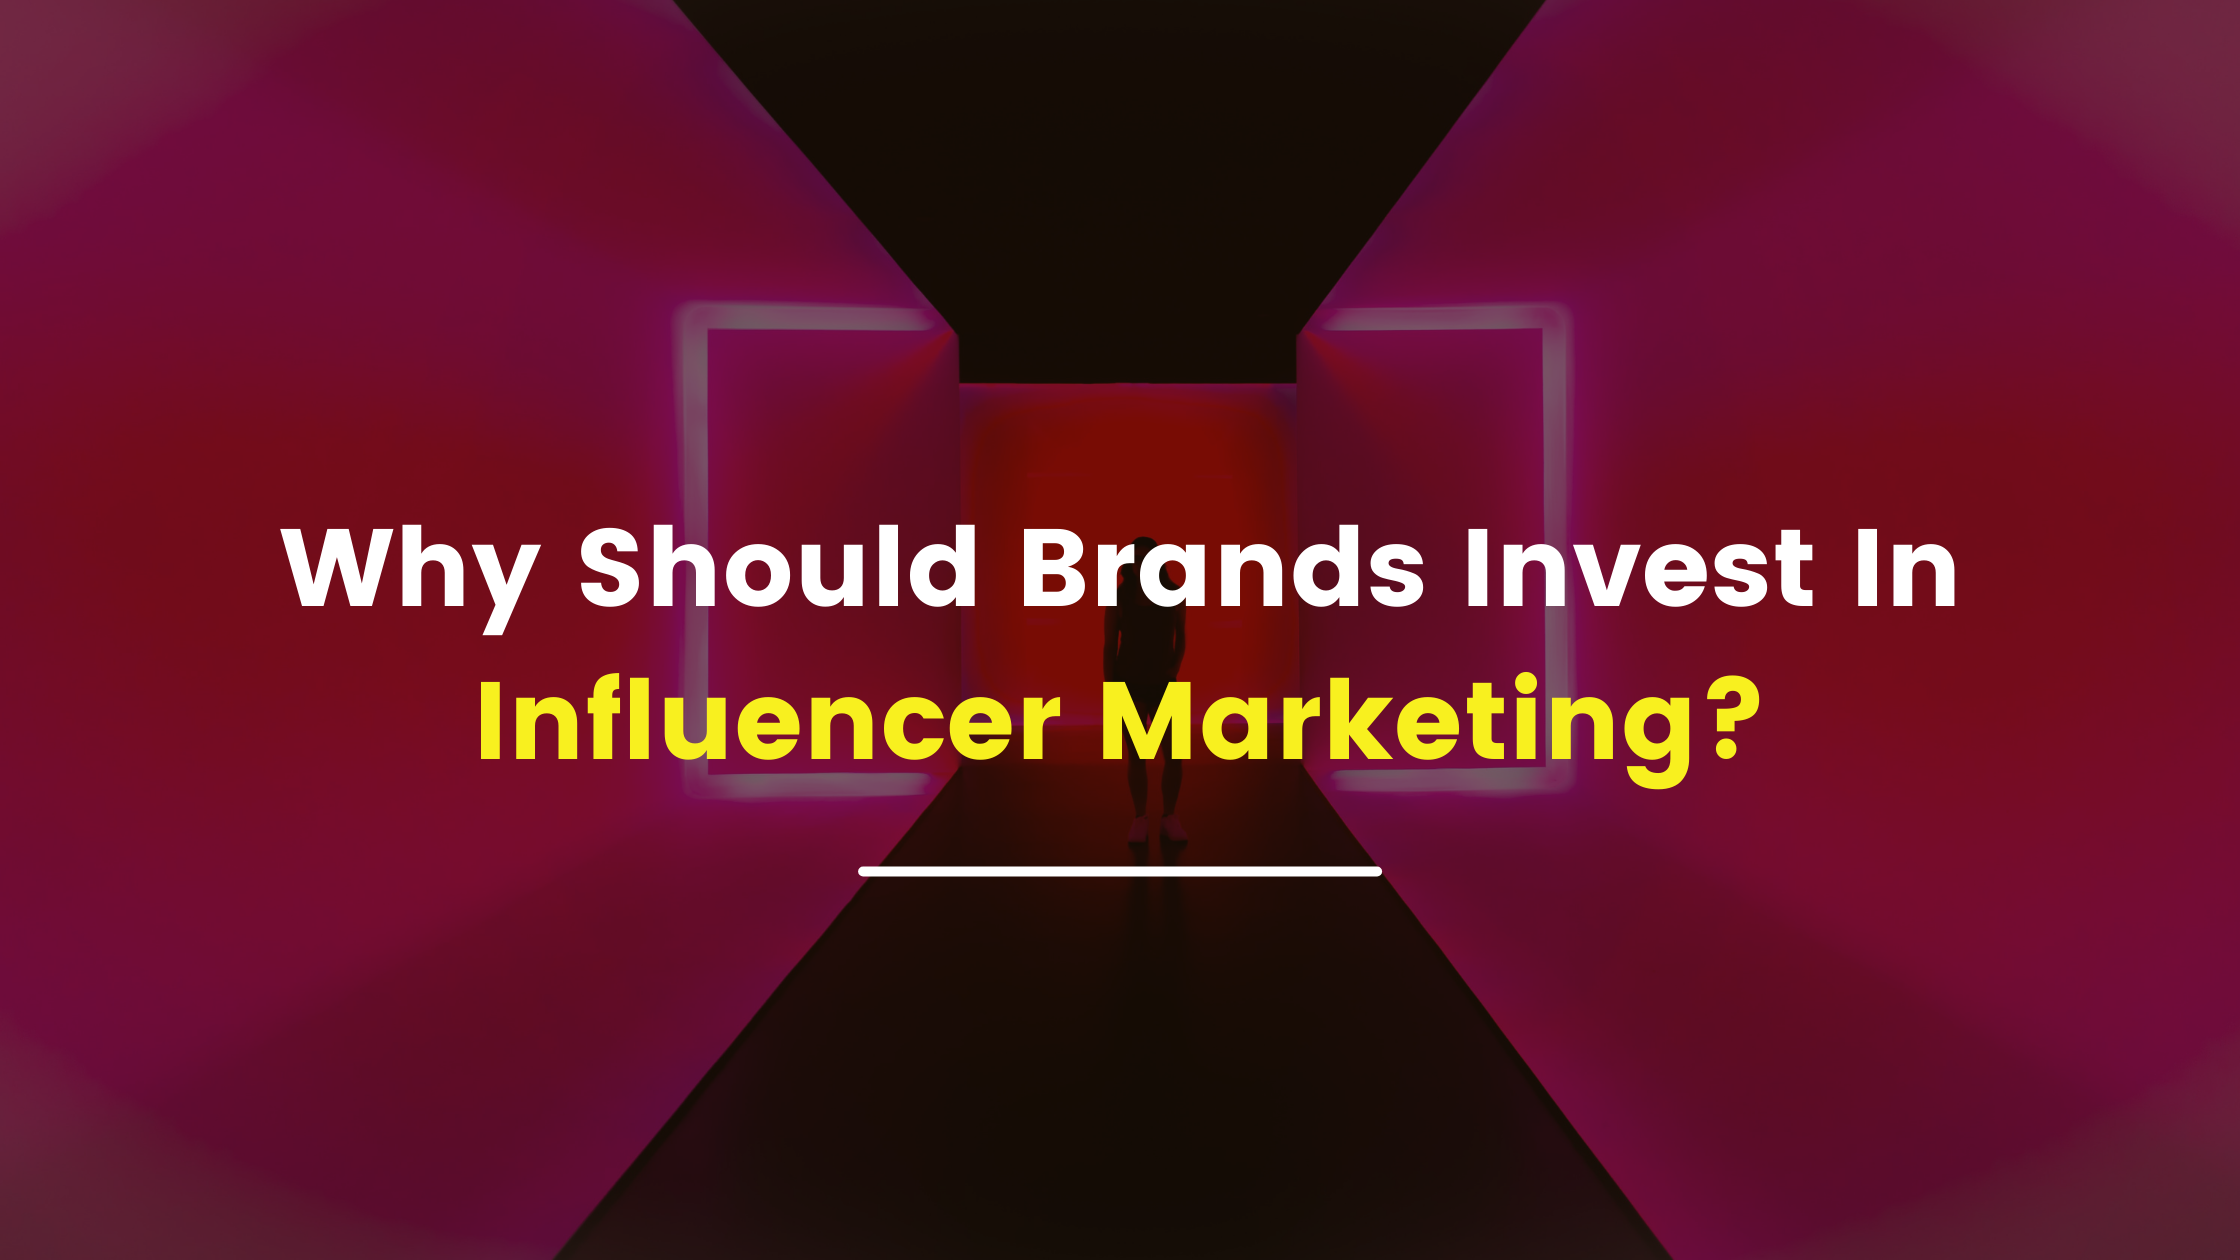 Why Should Brands Invest In Influencer Marketing?